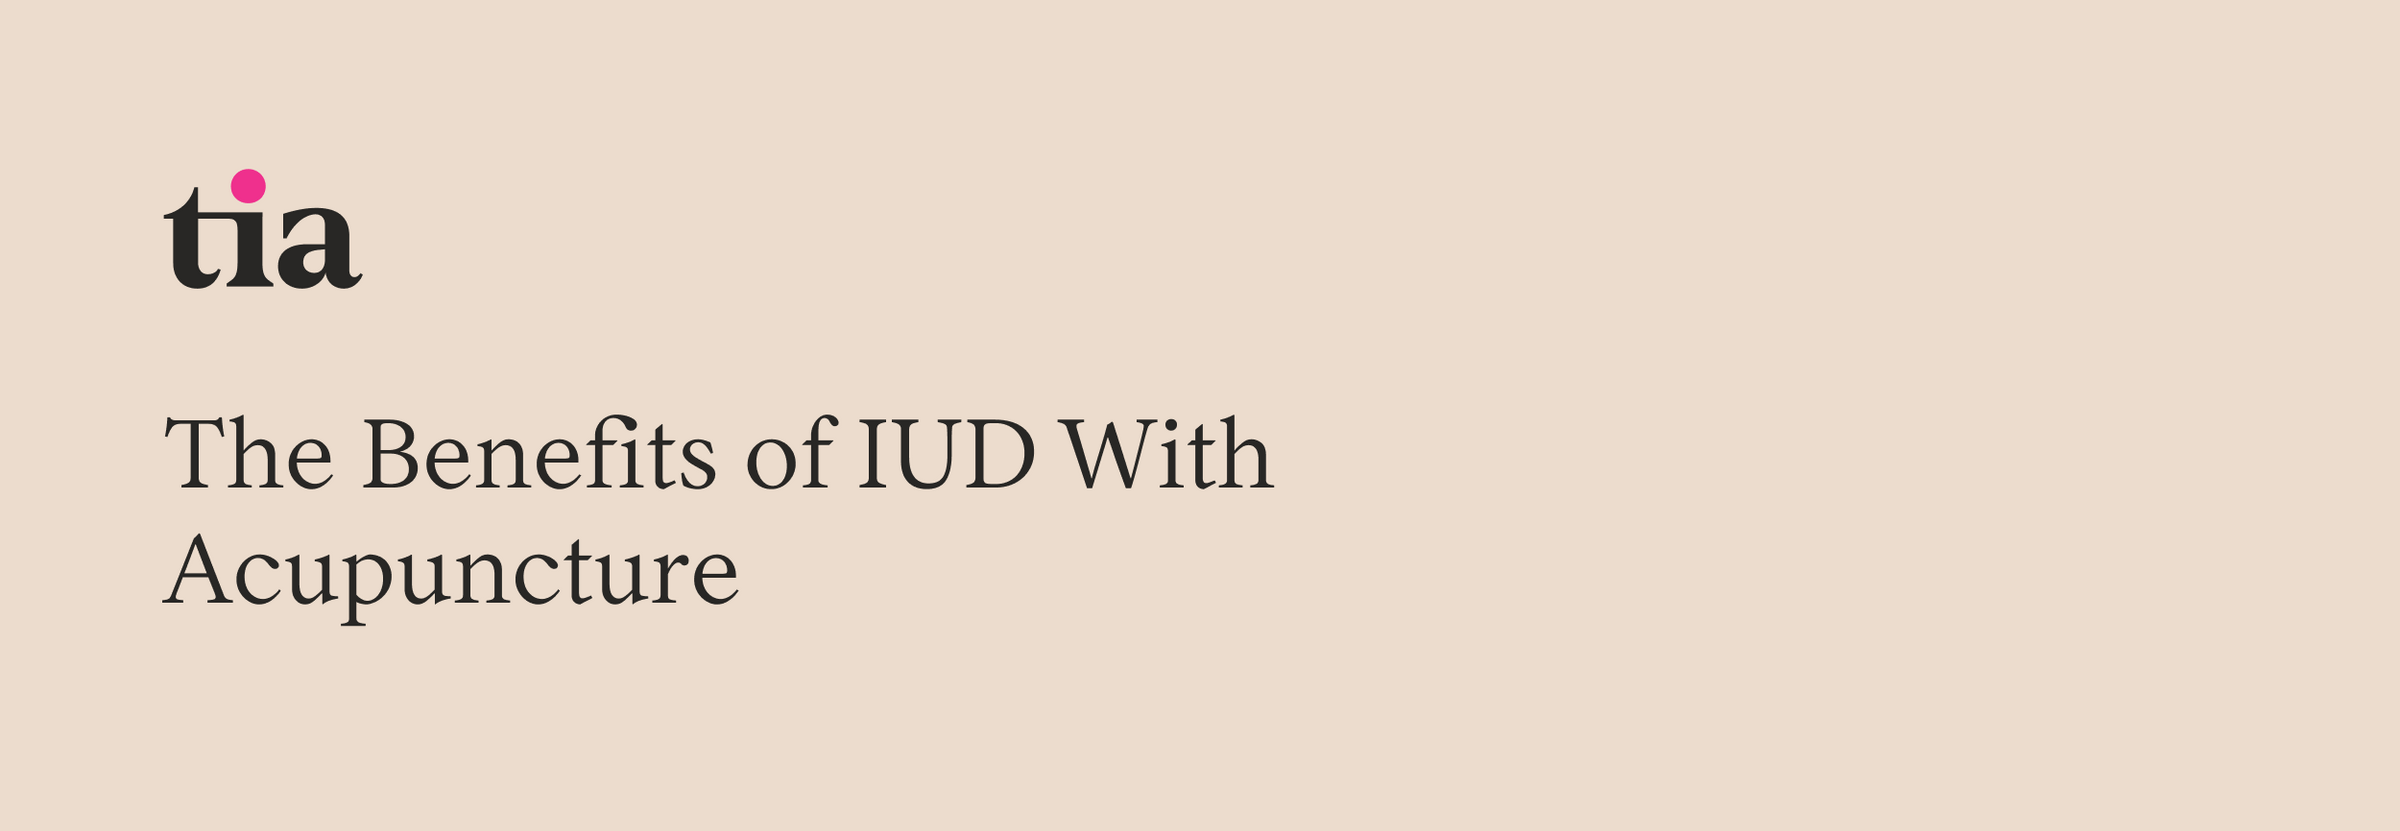 The Benefits of IUD With Acupuncture